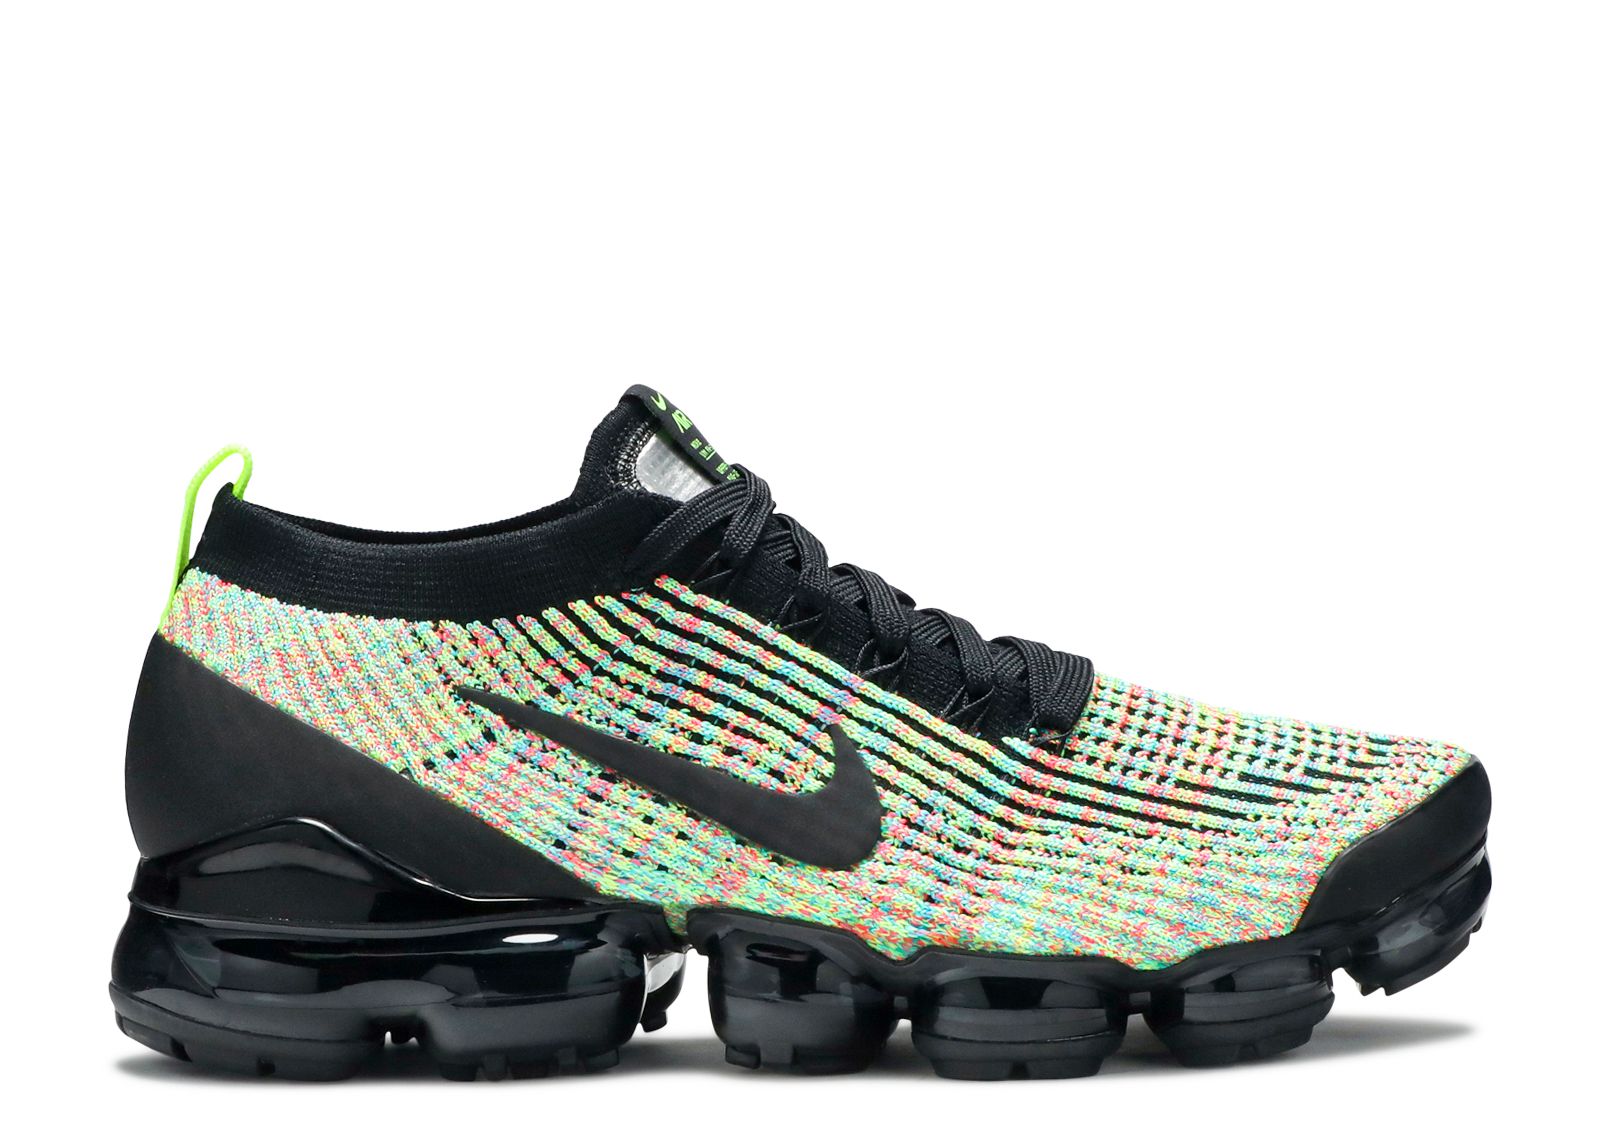 vapormax black and colorful